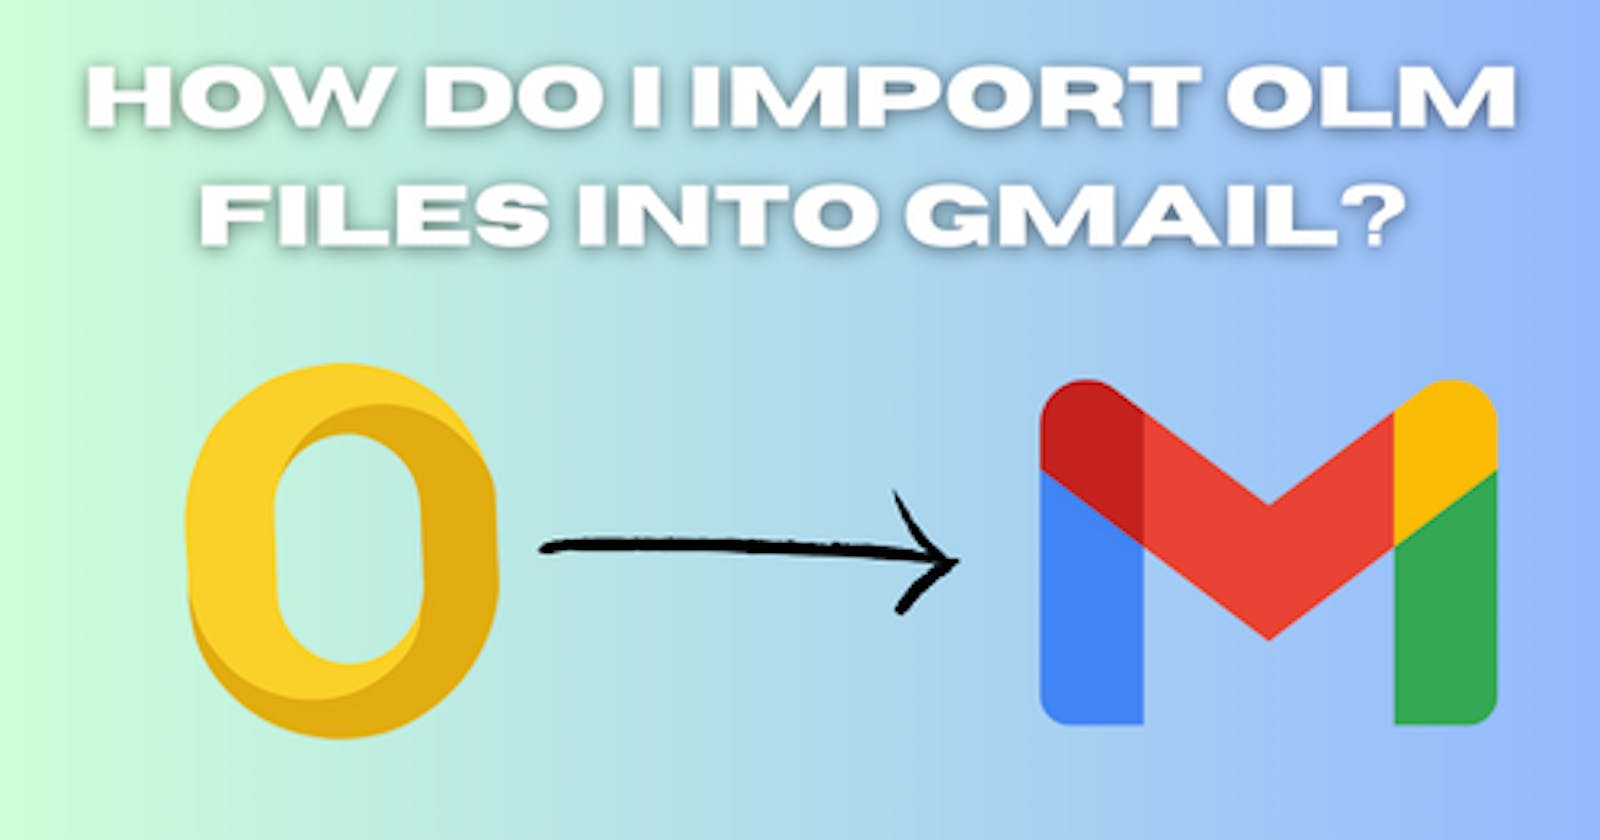 How Do I Import OLM Files into Gmail?